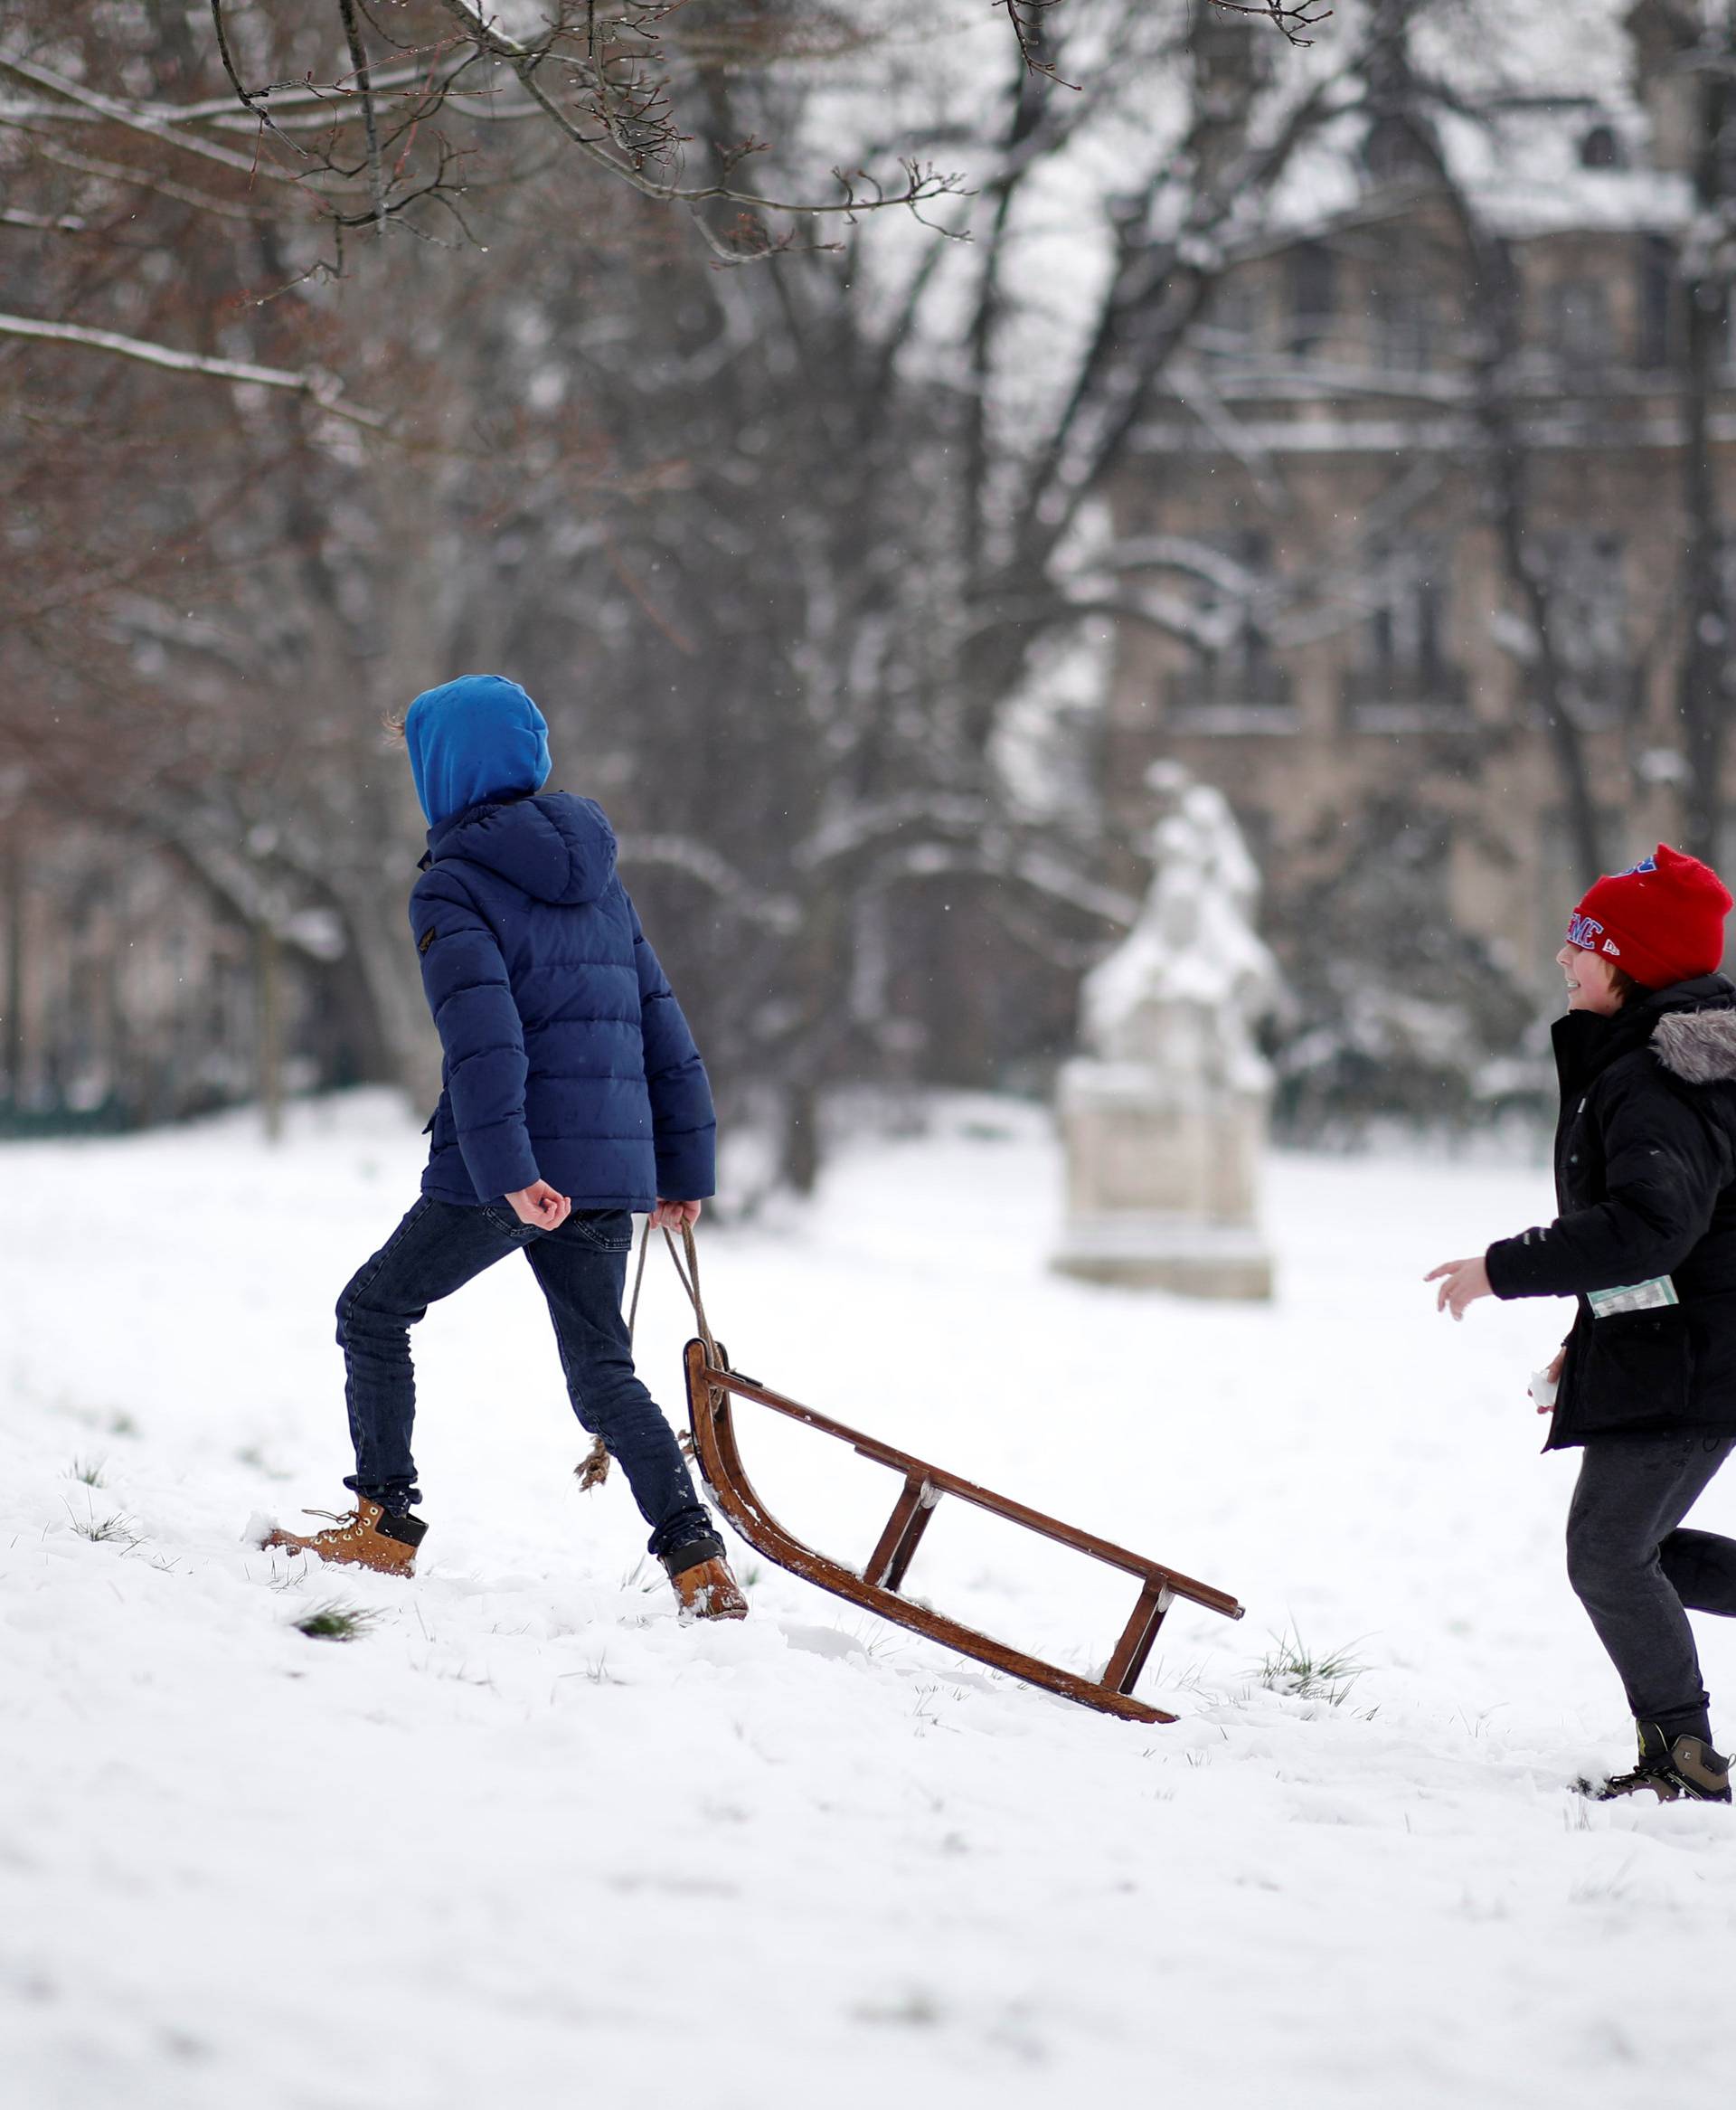 Youths play after a fresh snowfall in the Parc Monceau as winter weather bringing snow and freezing temperatures continues in Paris